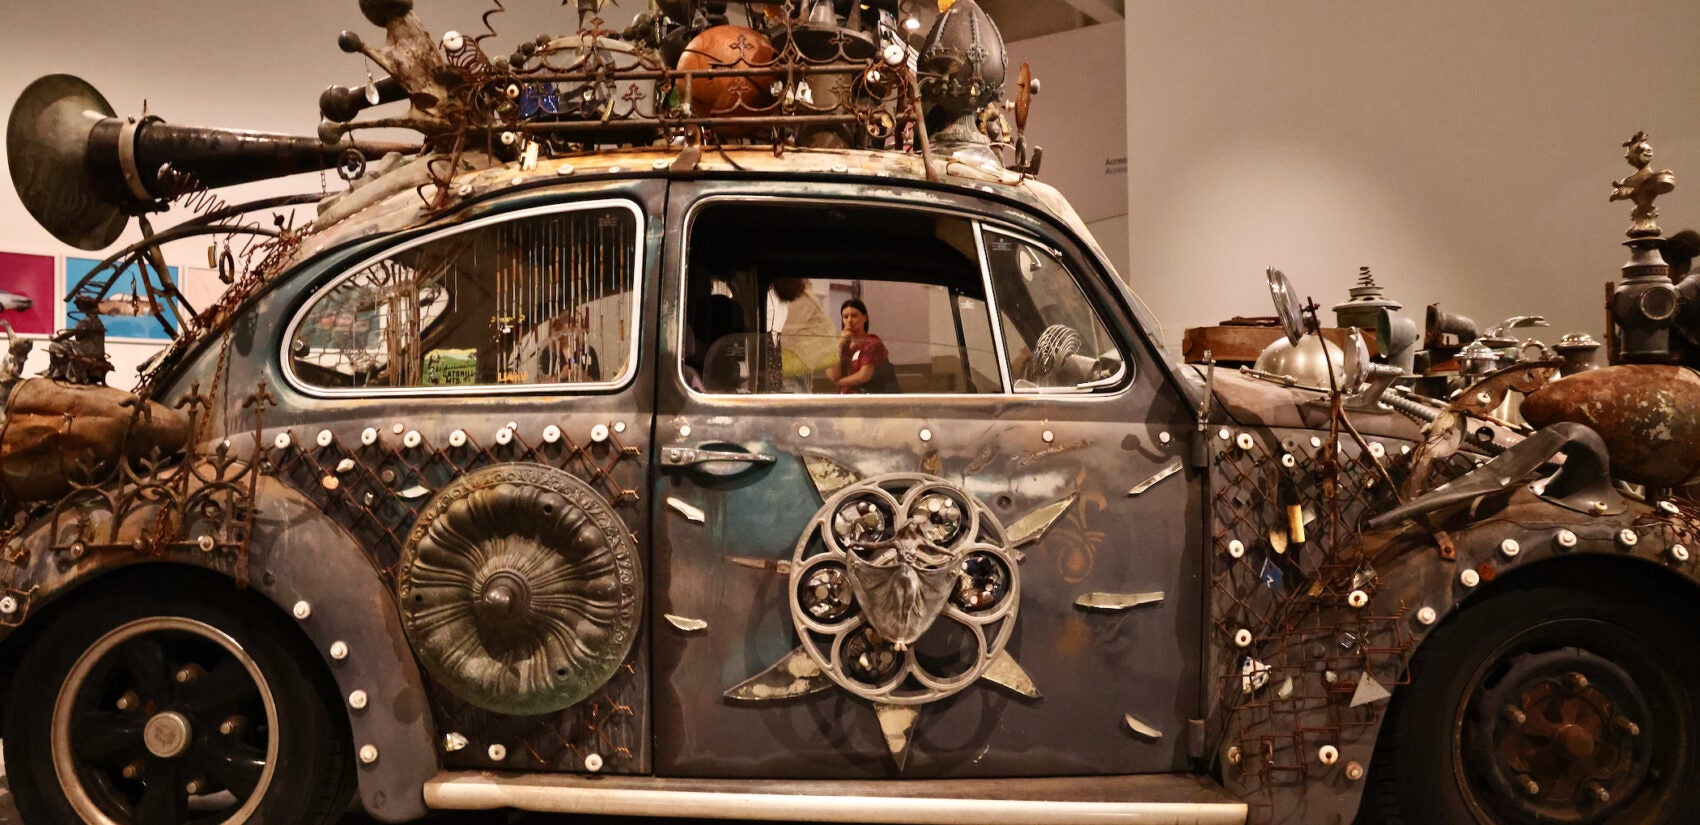 ''Art Car (Volkswagen)'' was created by Clarke Bedford. It is part of Josh T. Franco's exhibit on yard art at the Institute of Contemporary Art. (Emma Lee/WHYY)